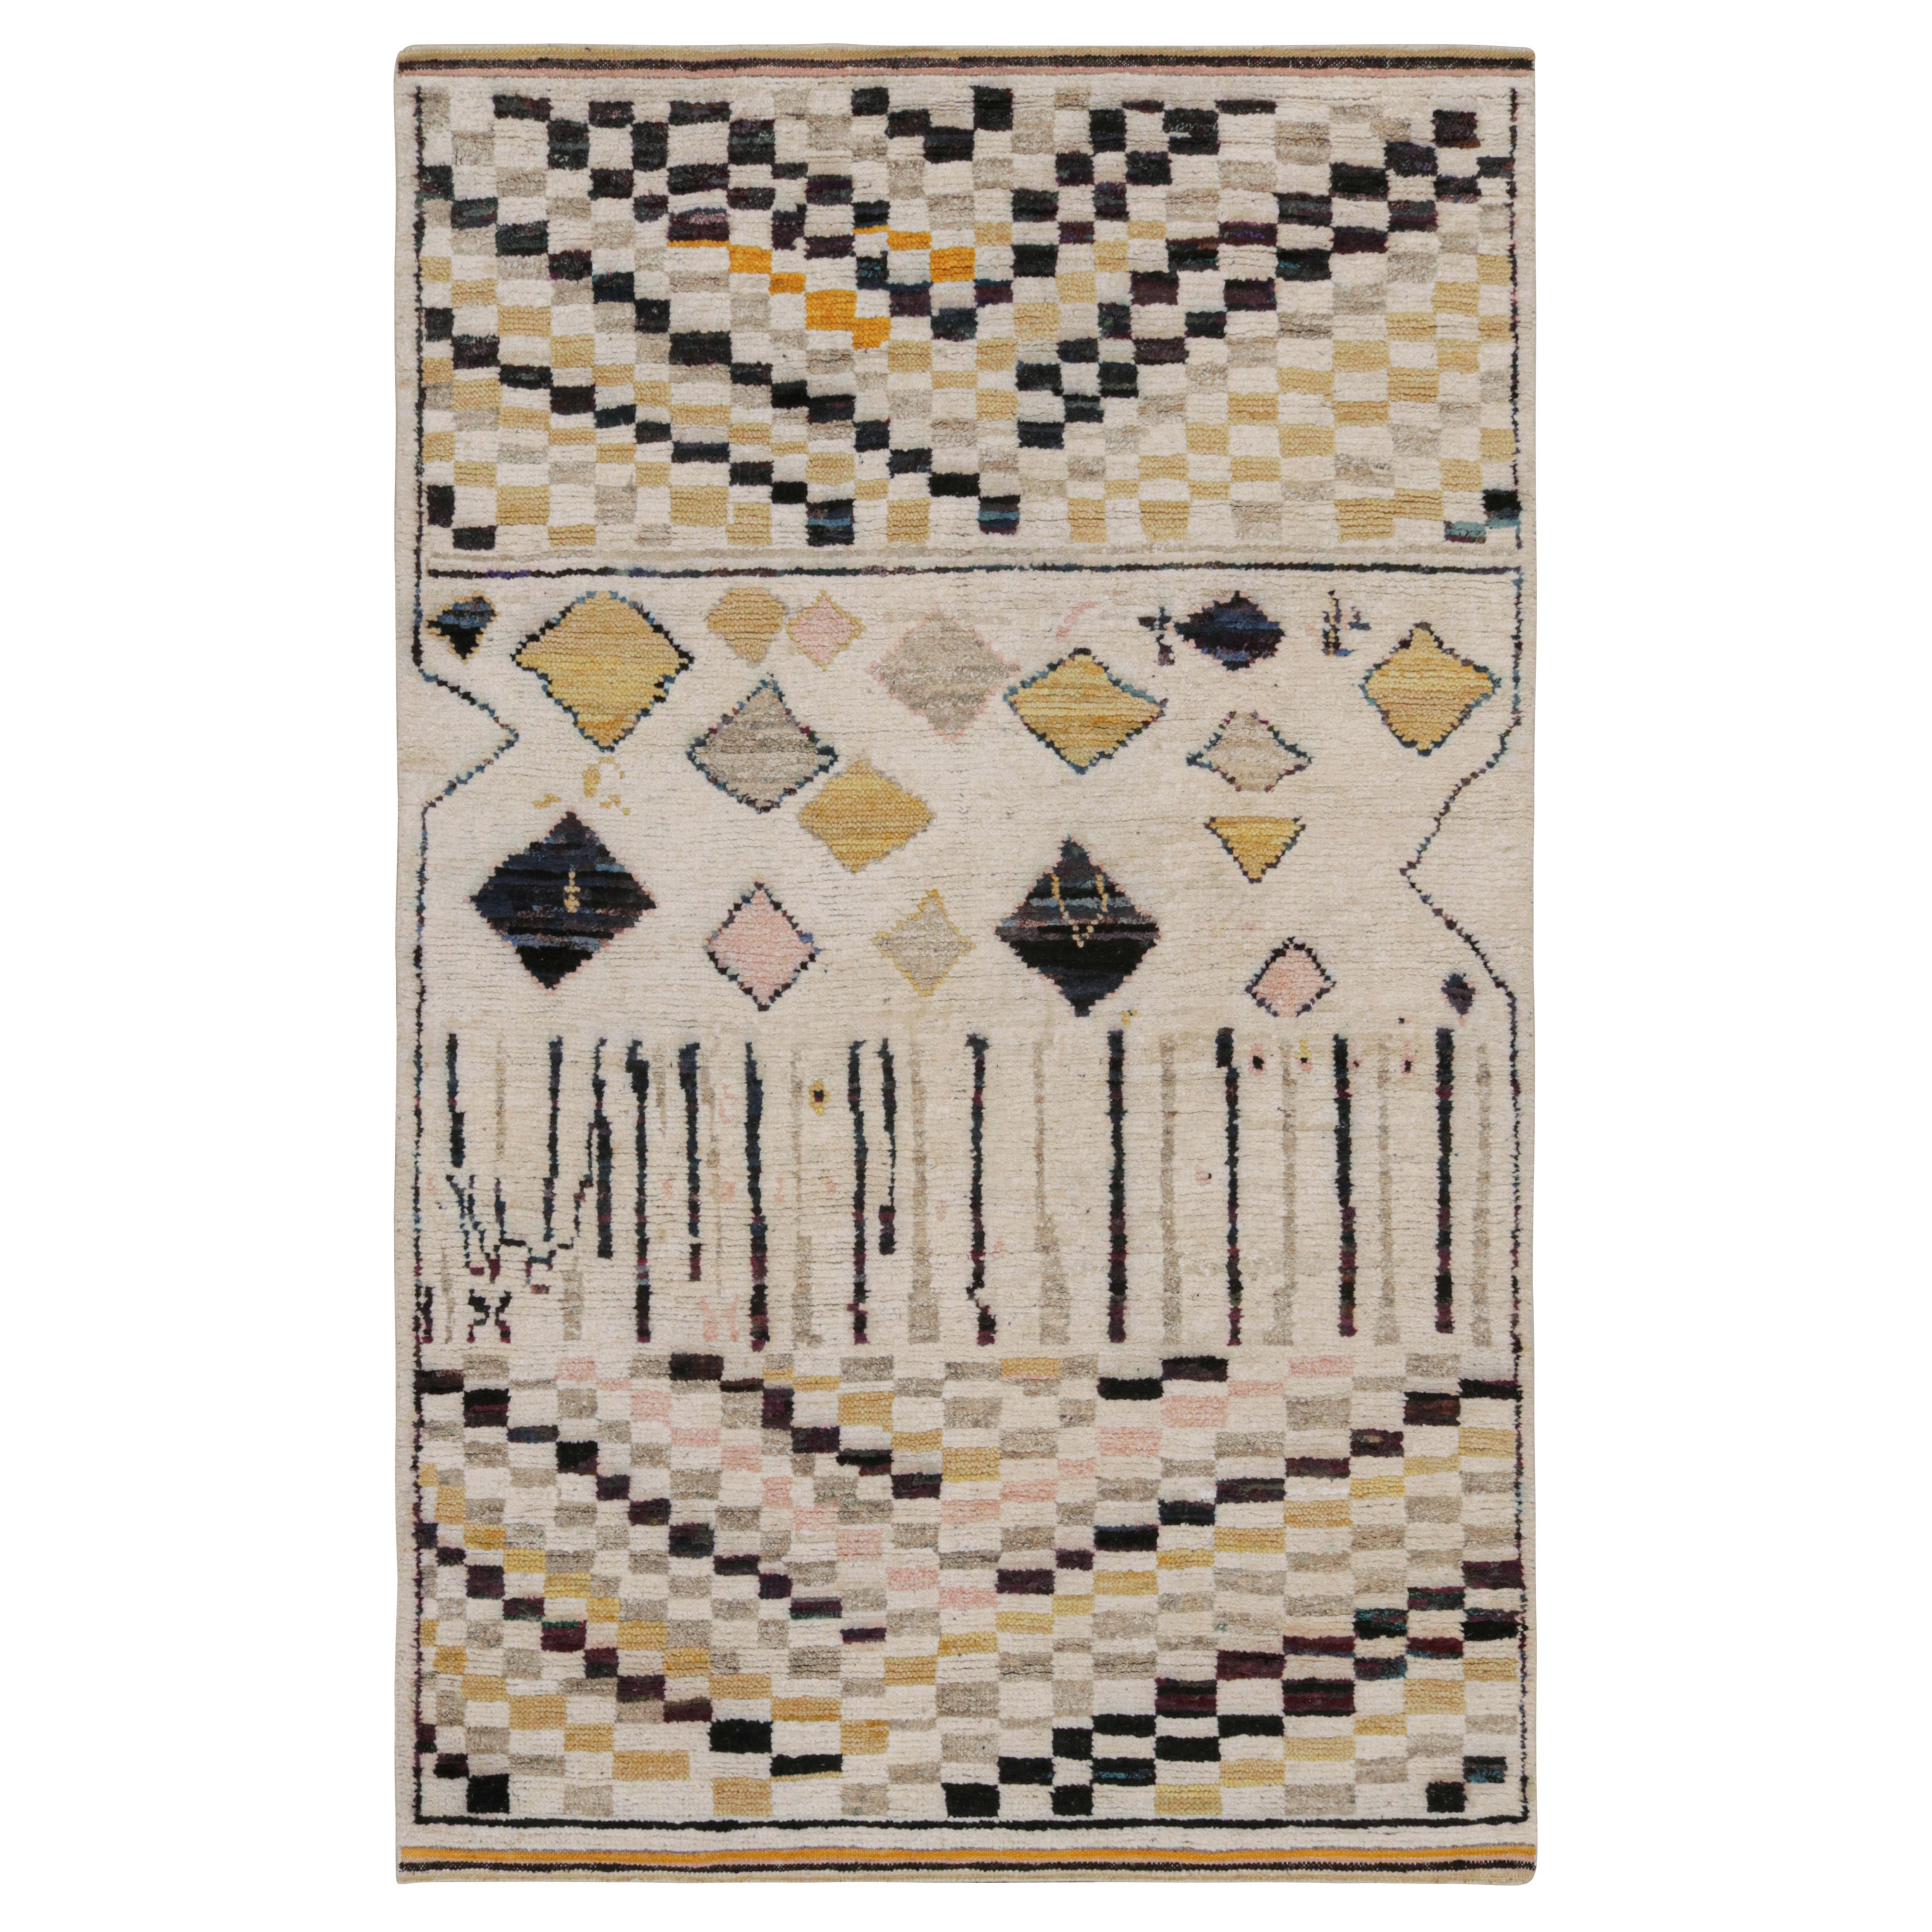 Rug & Kilim’s Moroccan Style Rug in Beige, Black and Gold Geometric Patterns For Sale